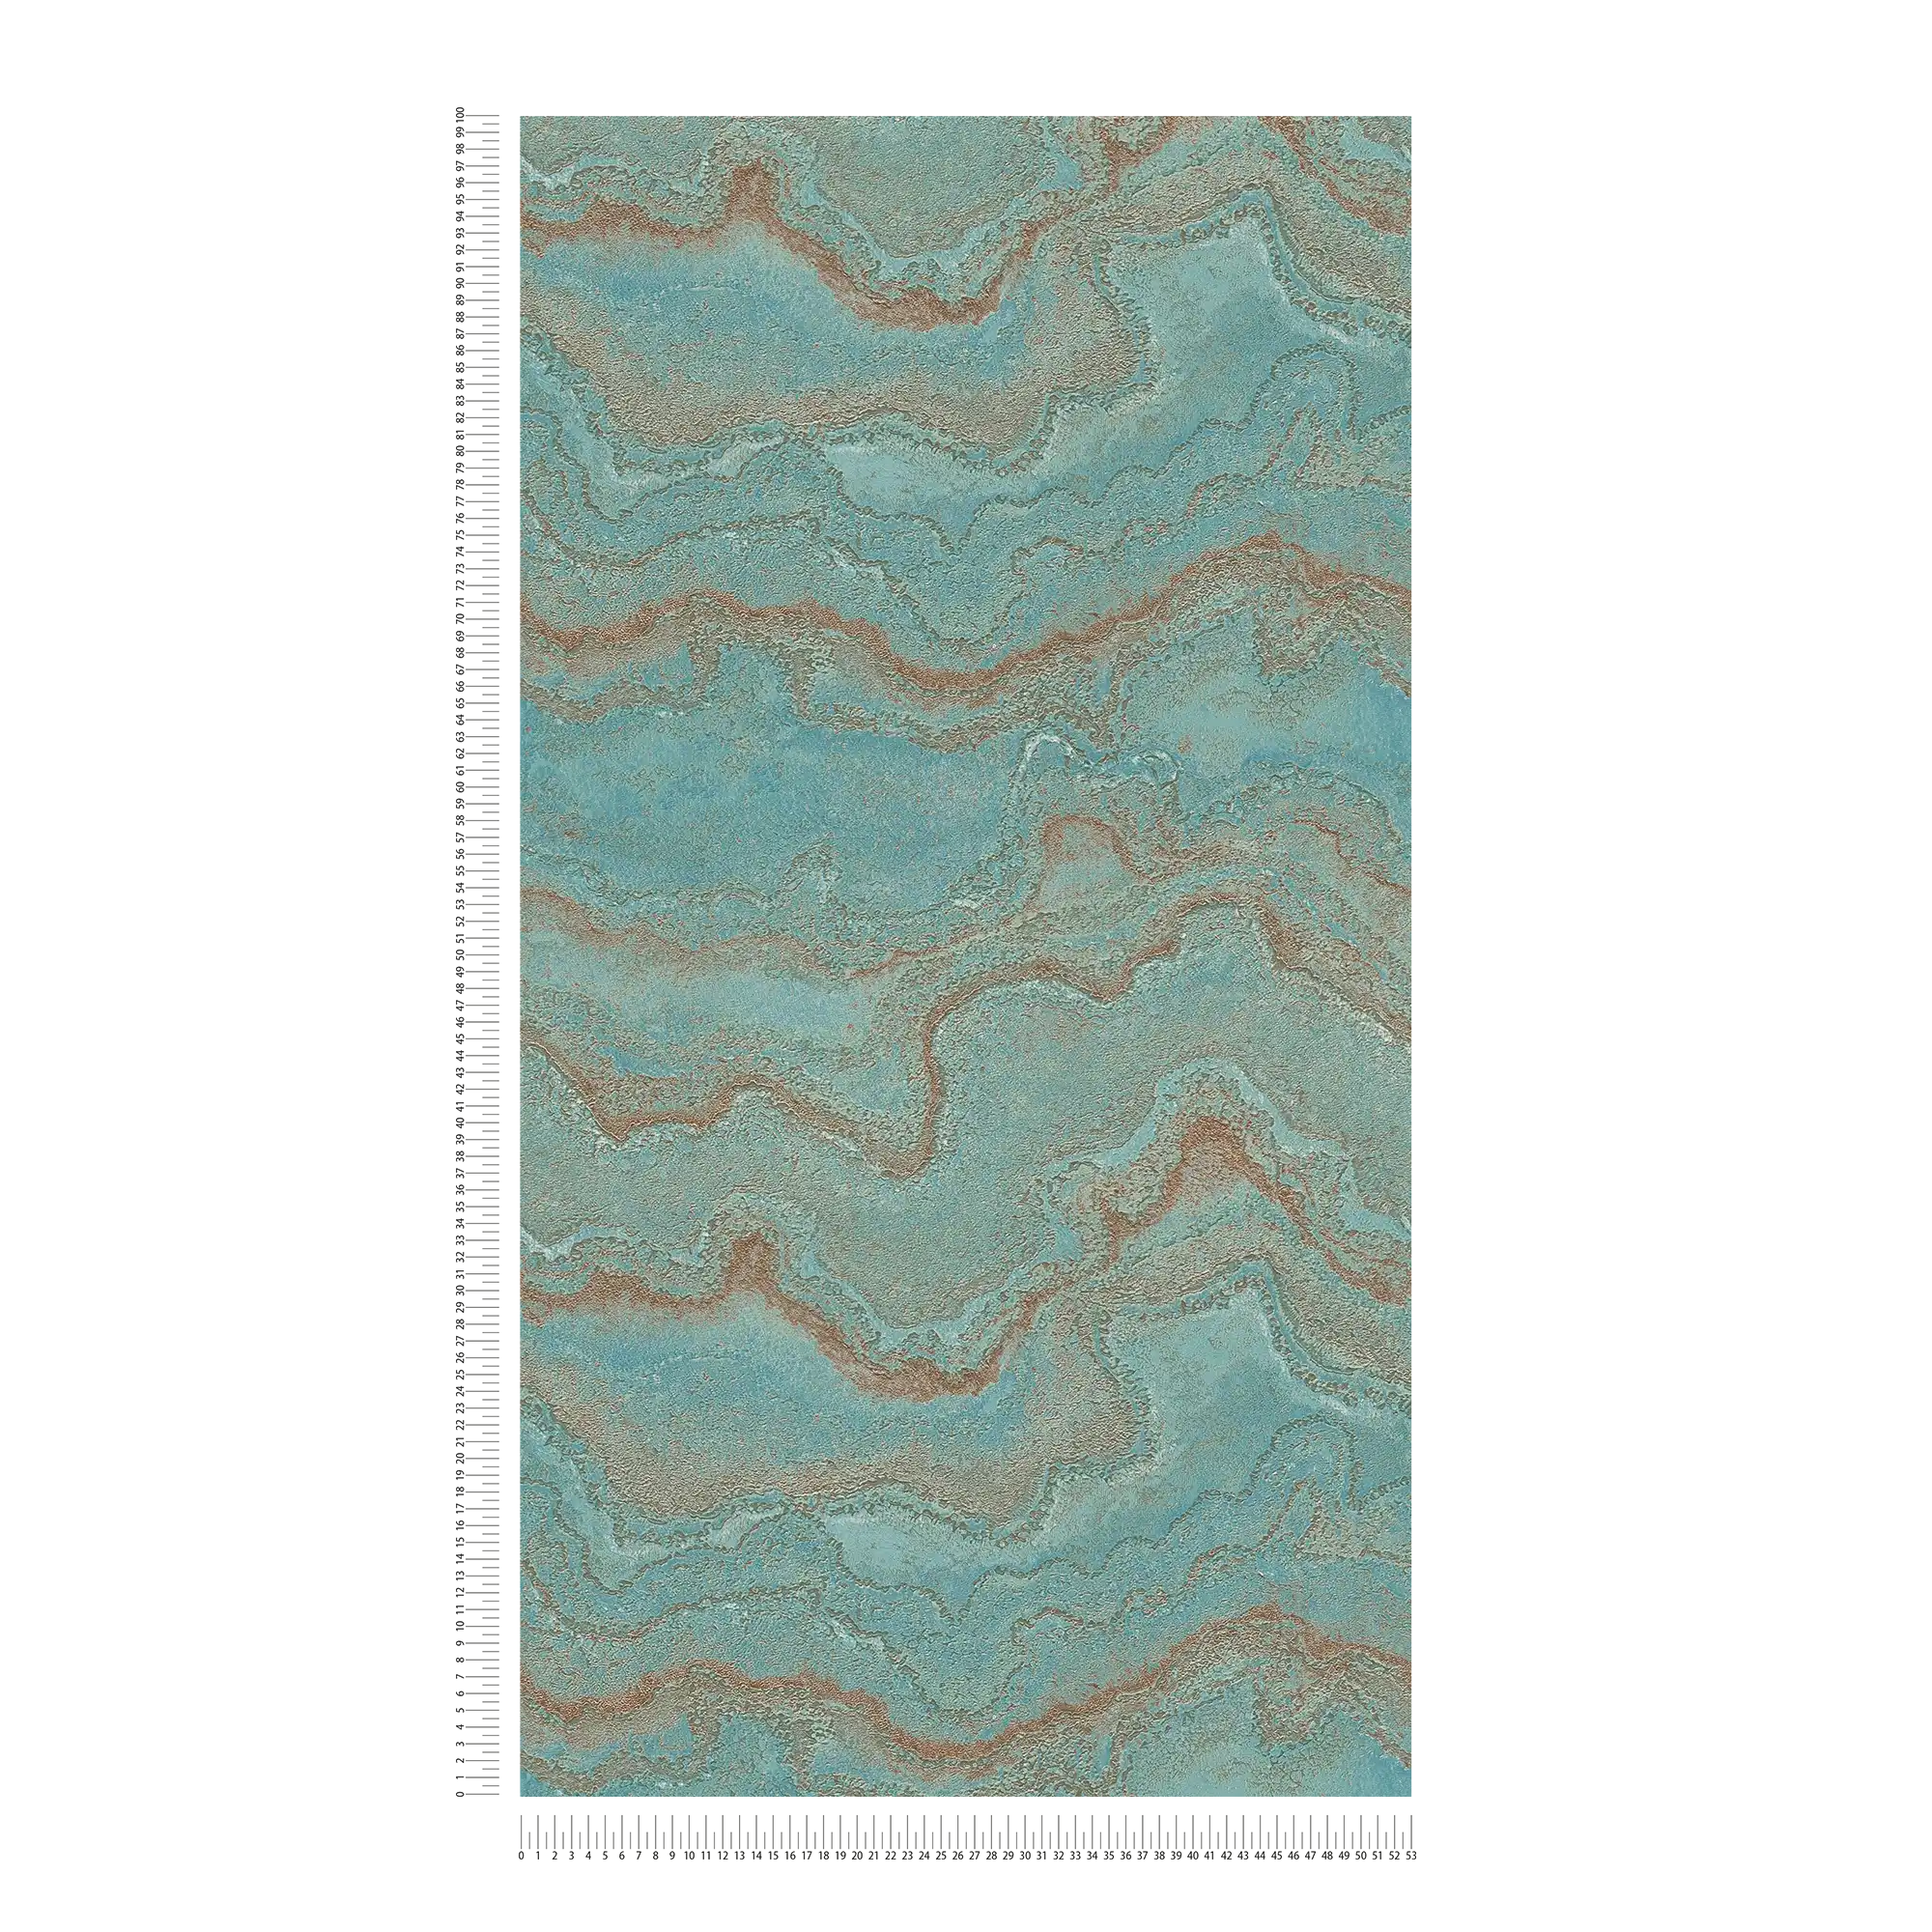             Marbled non-woven wallpaper with metallic effect - blue, turquoise, gold
        